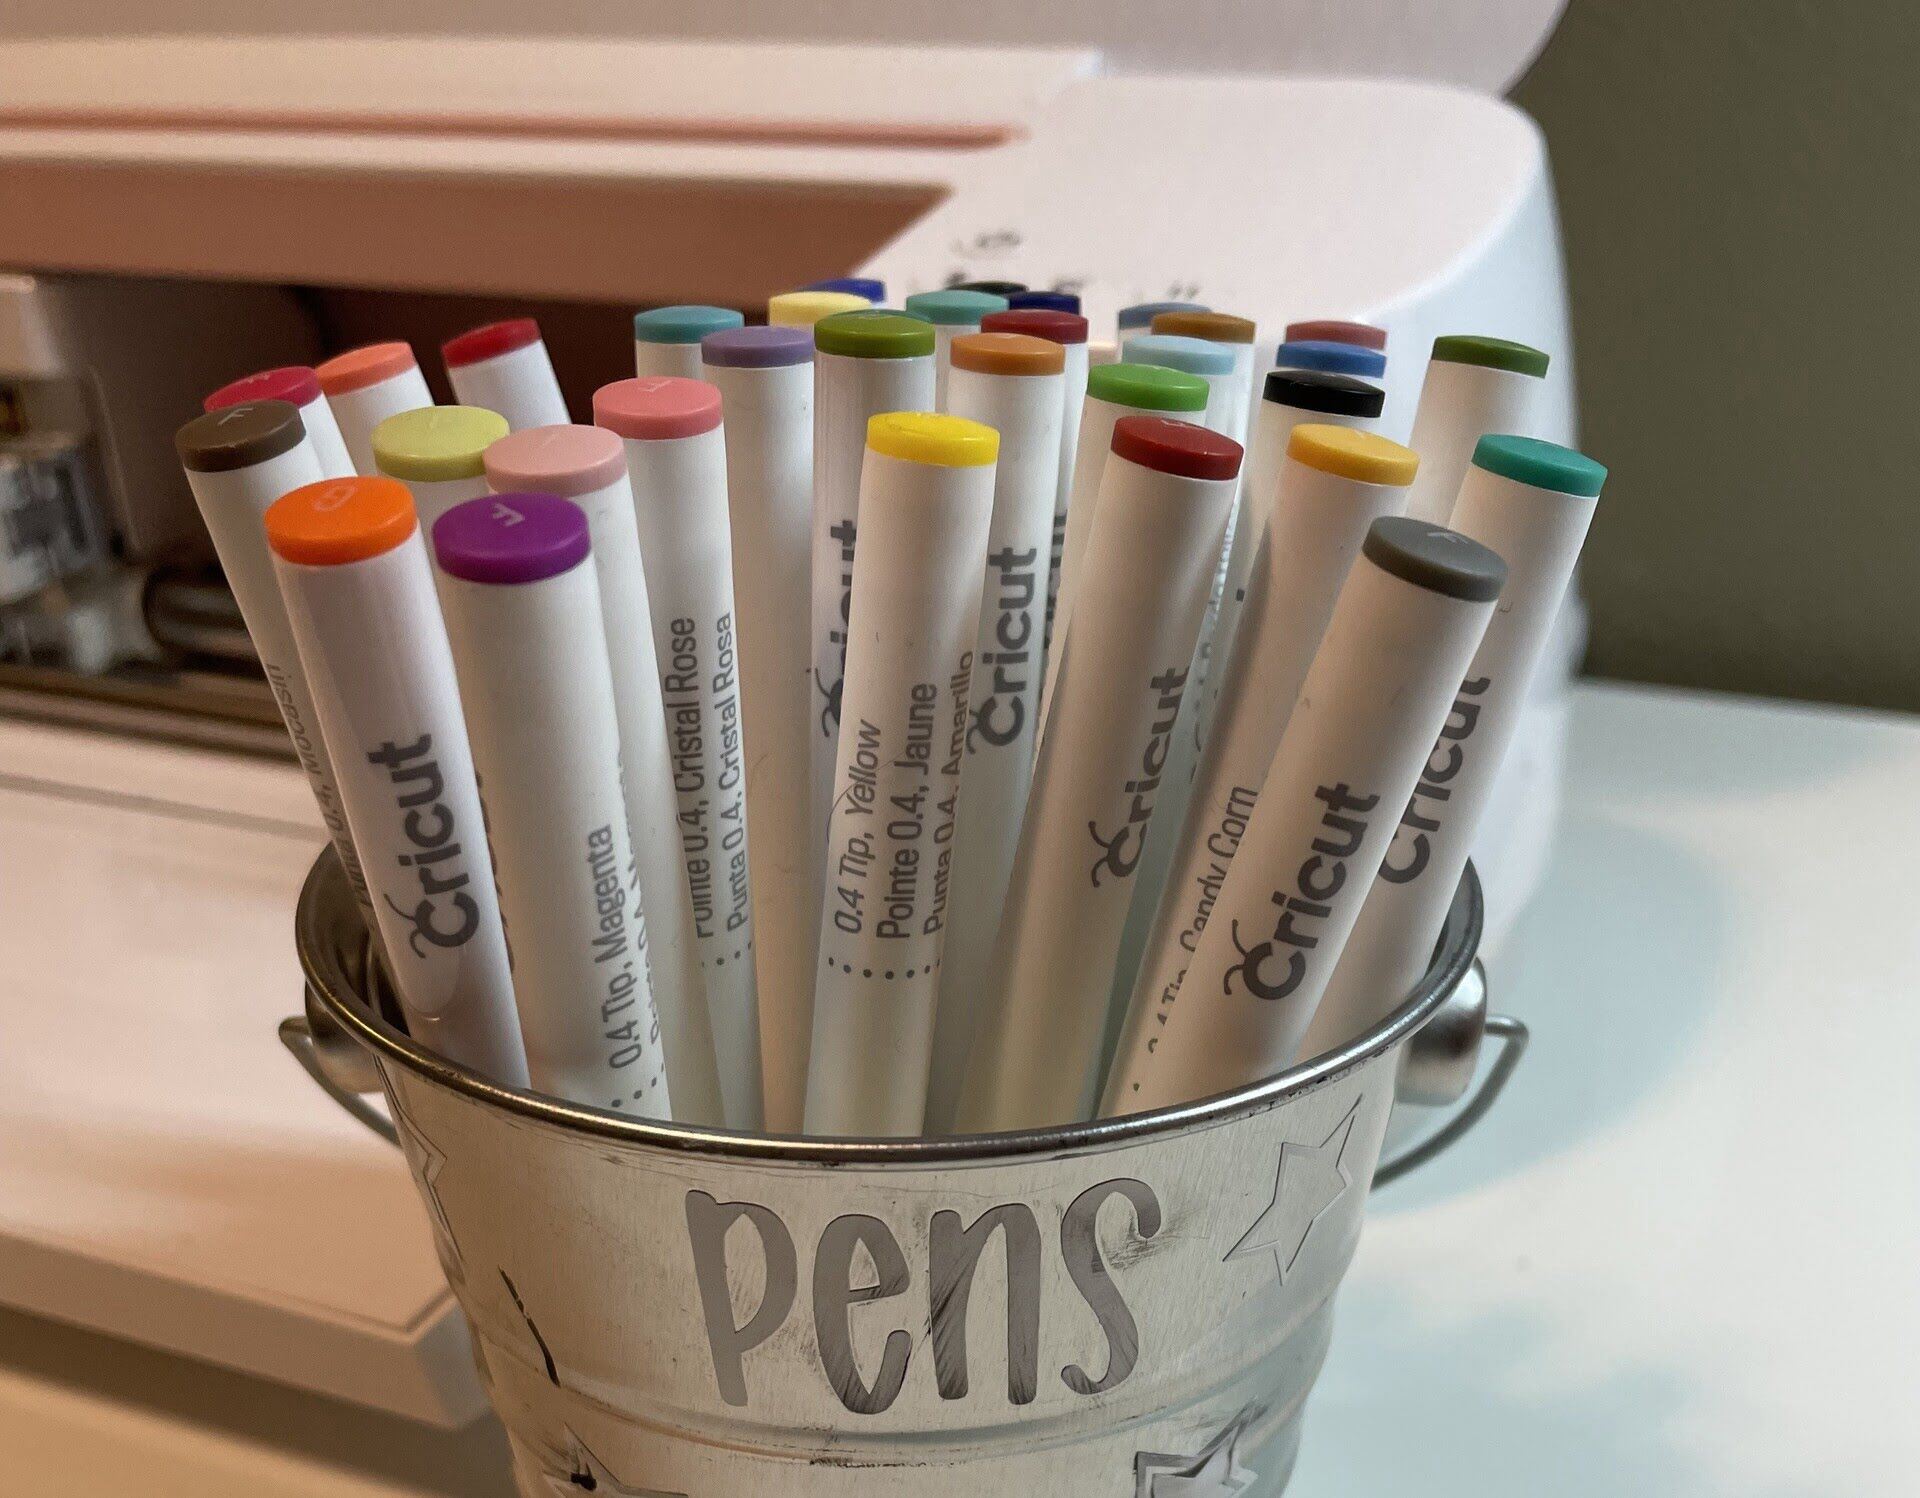 Cricut hack. If your cricut pens keep popping out of the holder